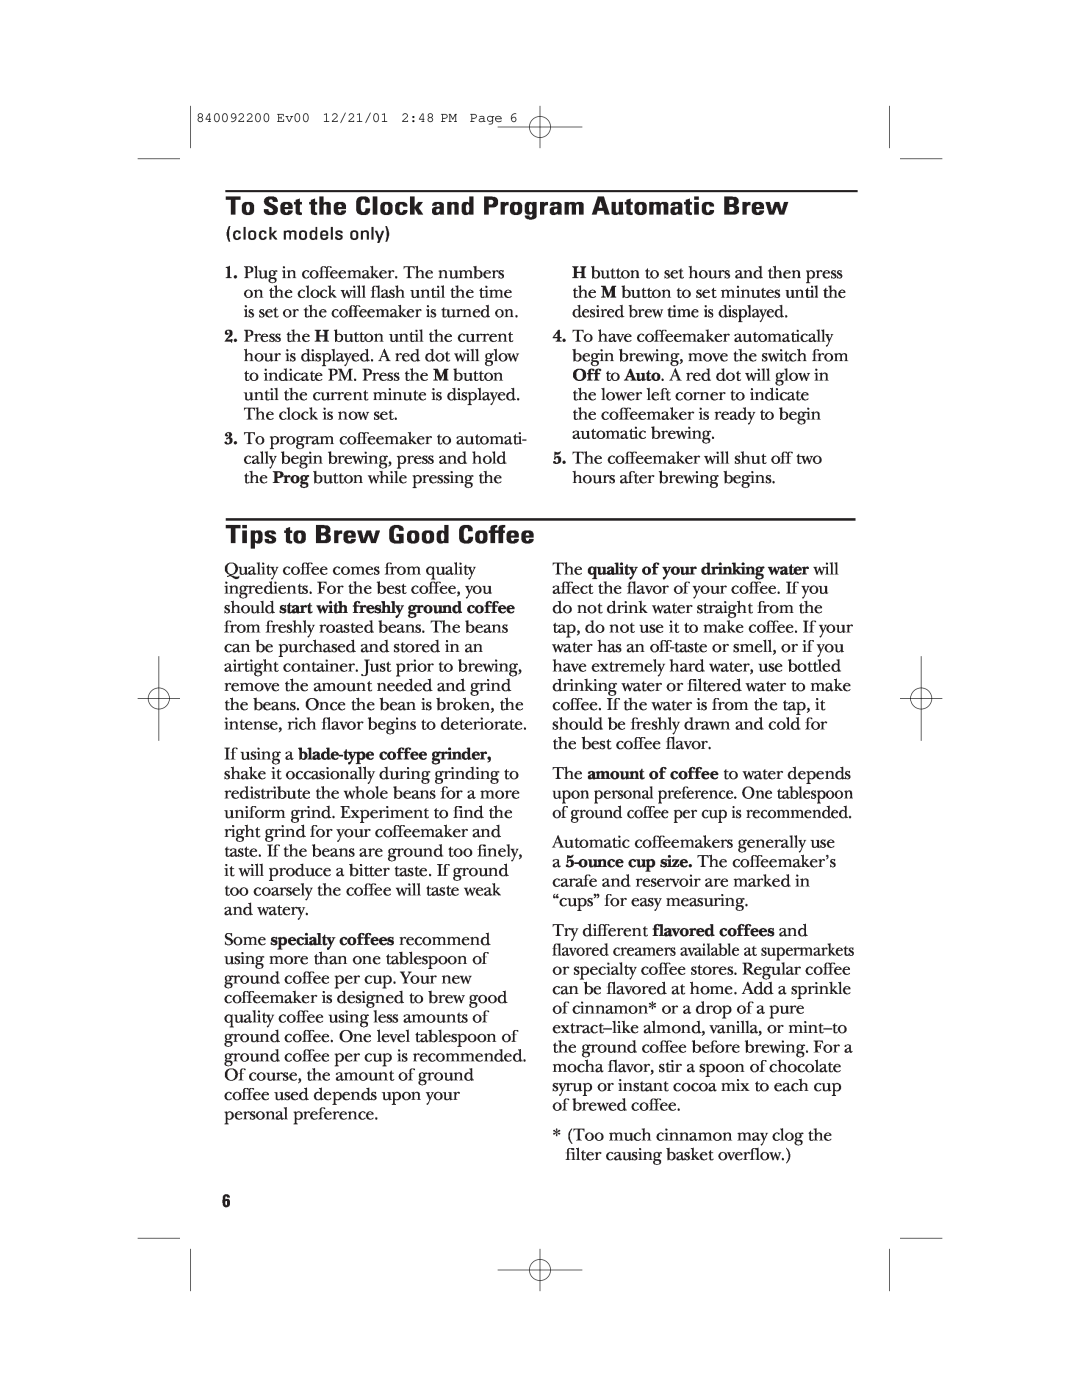 GE 840092200, 106721 manual To Set the Clock and Program Automatic Brew, Tips to Brew Good Coffee 